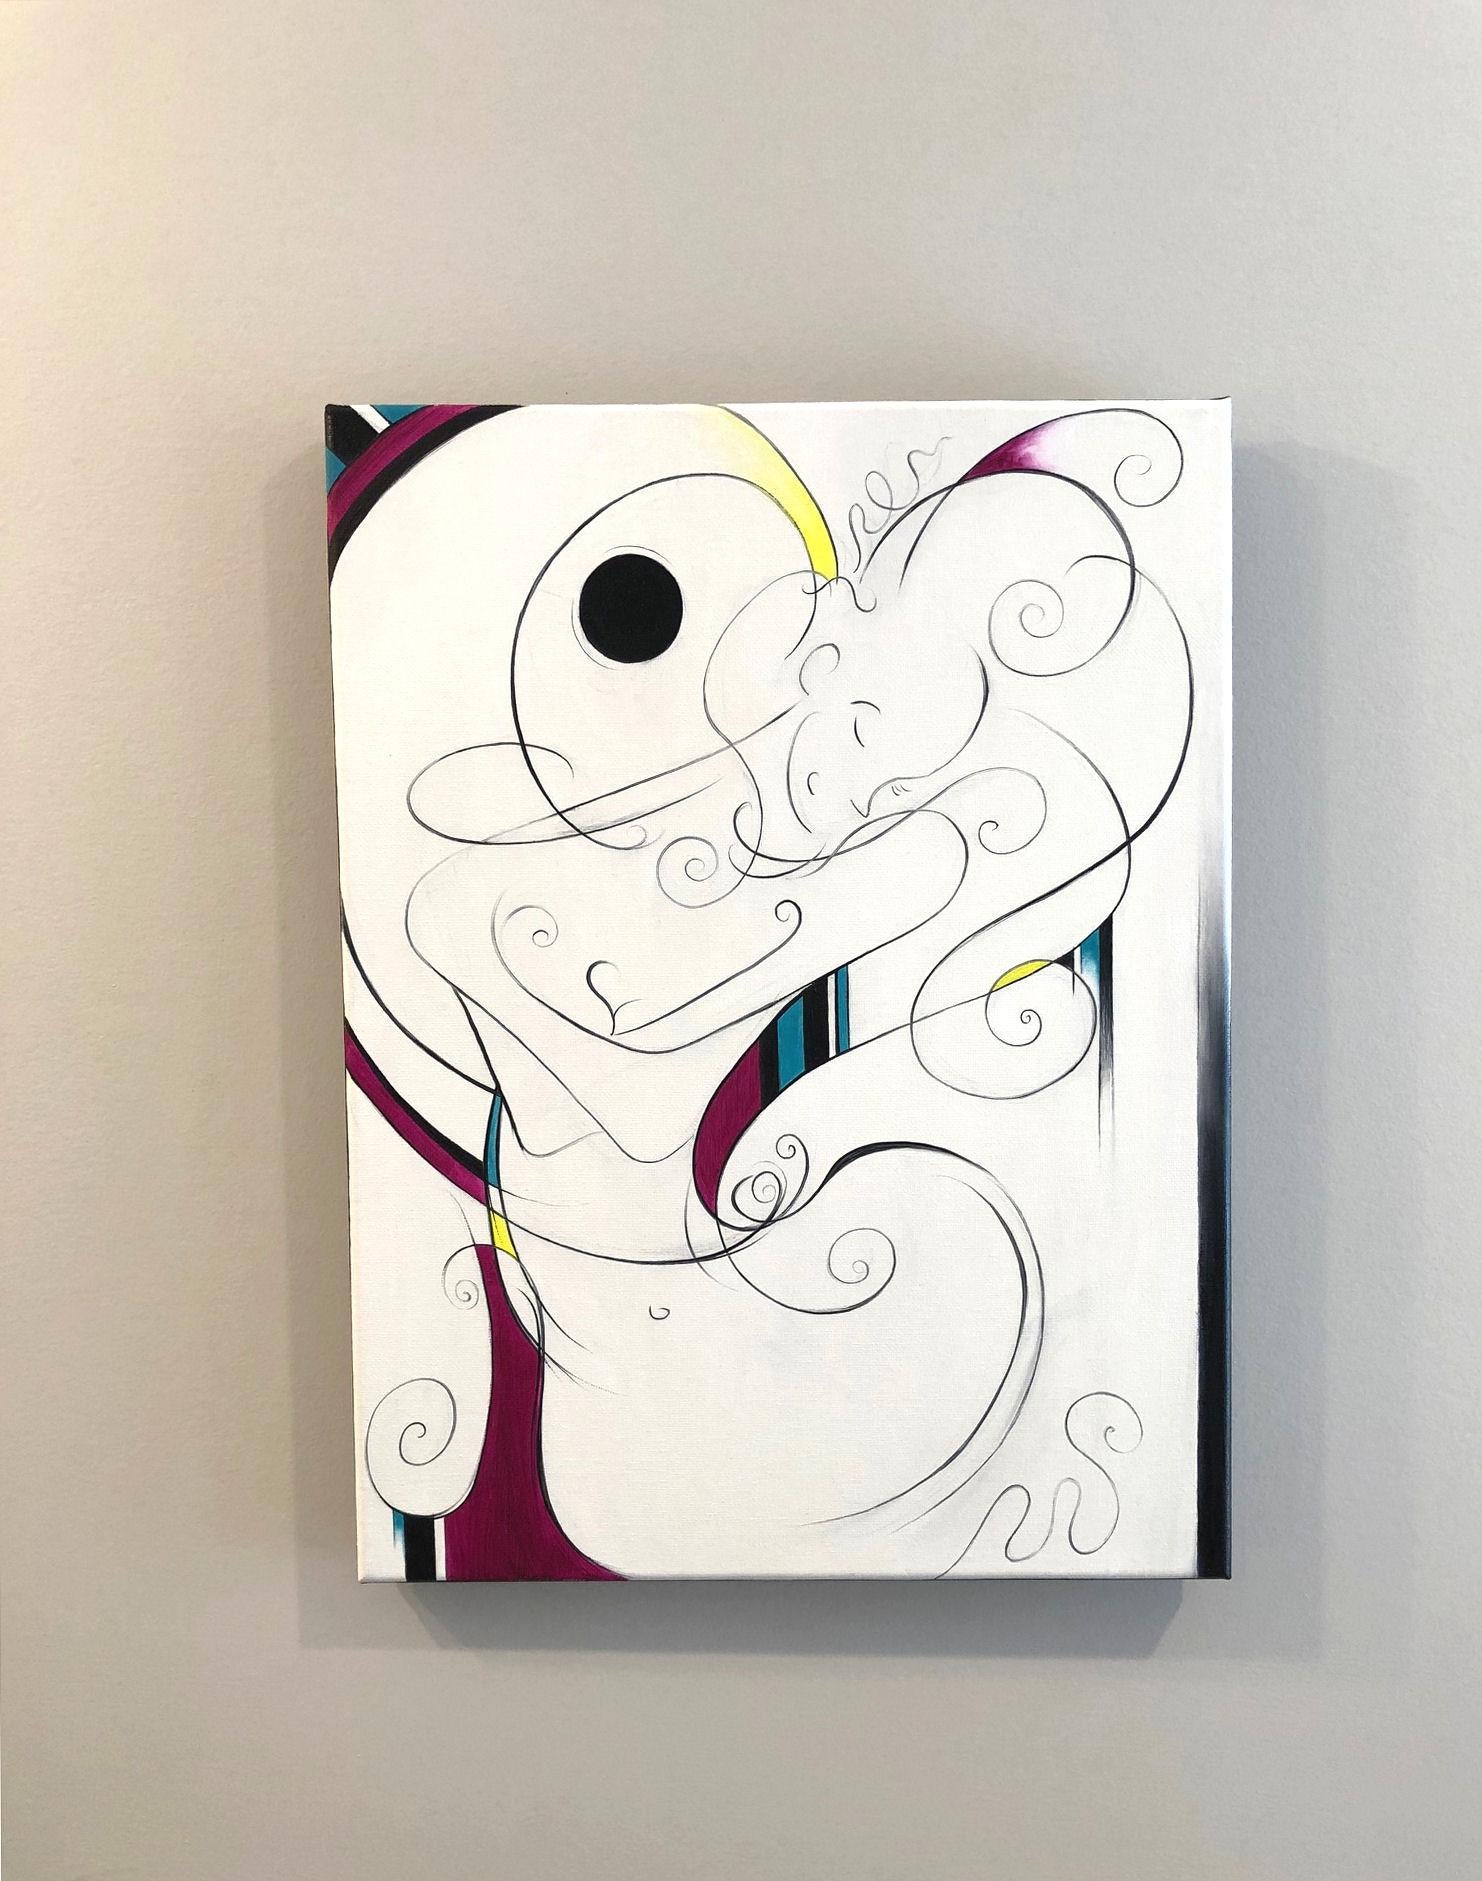 <p>Artist Comments<br>Recently, I took the major step of buying a house. After a tumultuous few weeks of real-estate buying stress, I christened my new studio by creating this little lady, the newest edition to my ongoing Curly Girl series. I saw my